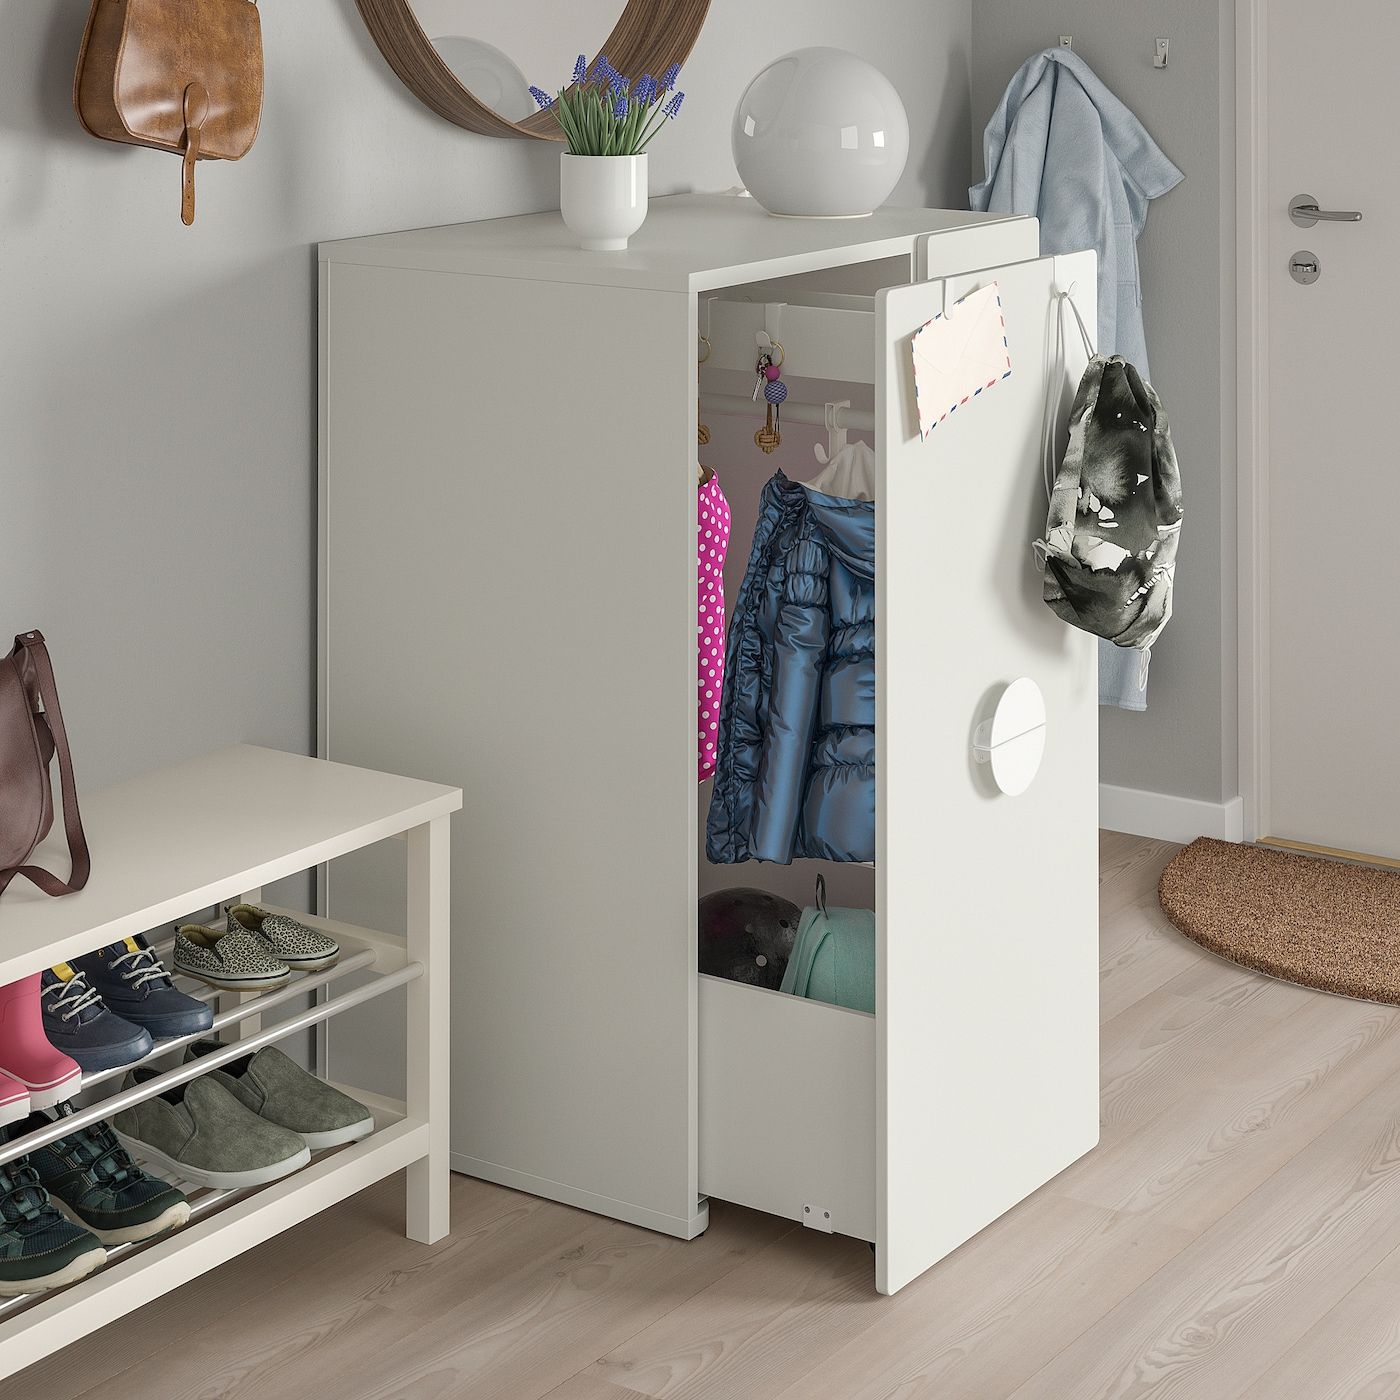 Småstad Wardrobe With Pull Out Unit, White, 31 ½x22 ½x42 ½" – Ikea With Regard To Childrens Wardrobes With Drawers And Shelves (View 6 of 20)